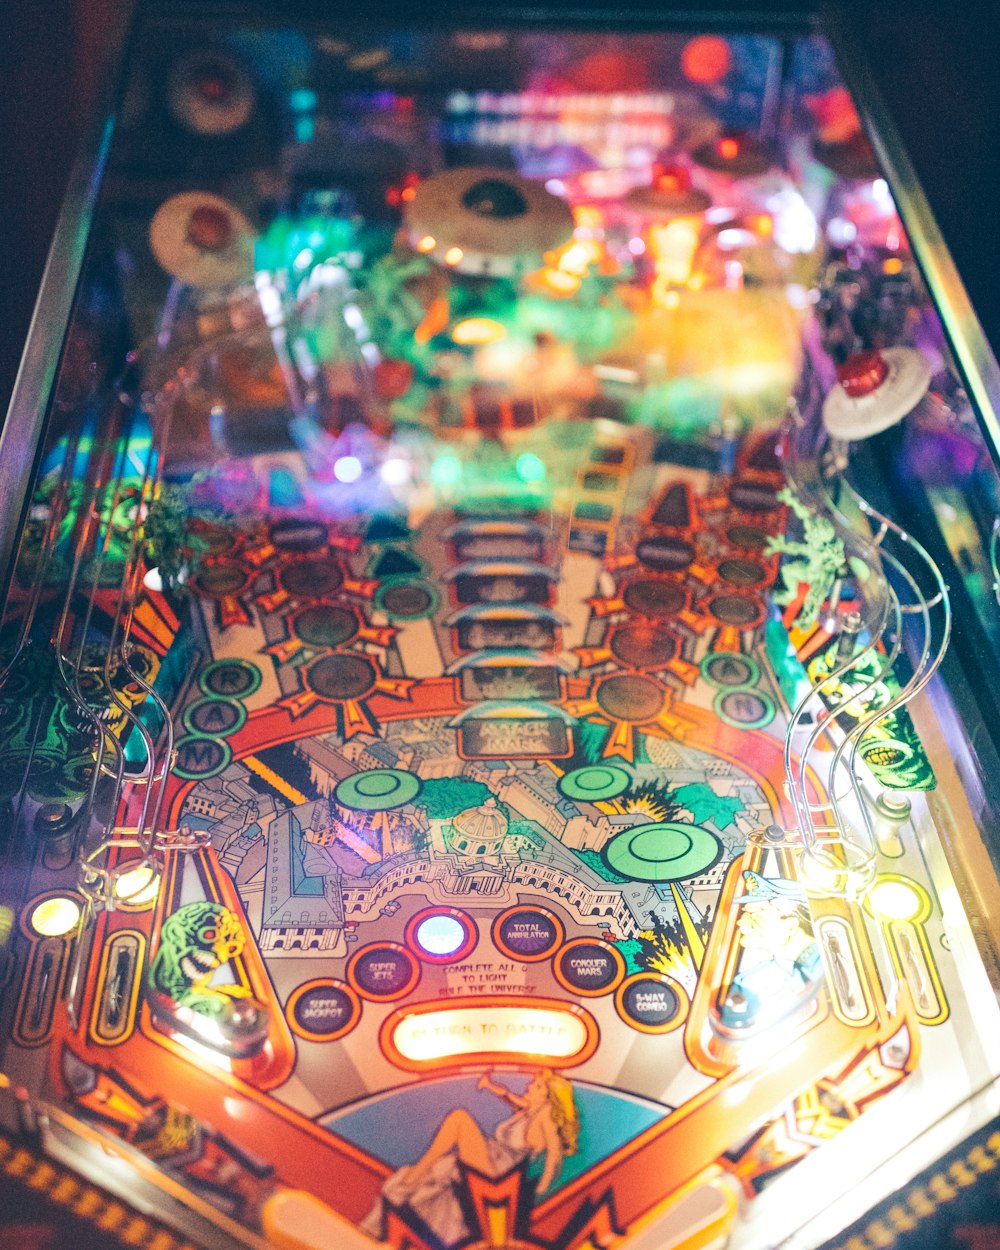 blue and multicolored pinball machine close-up photography